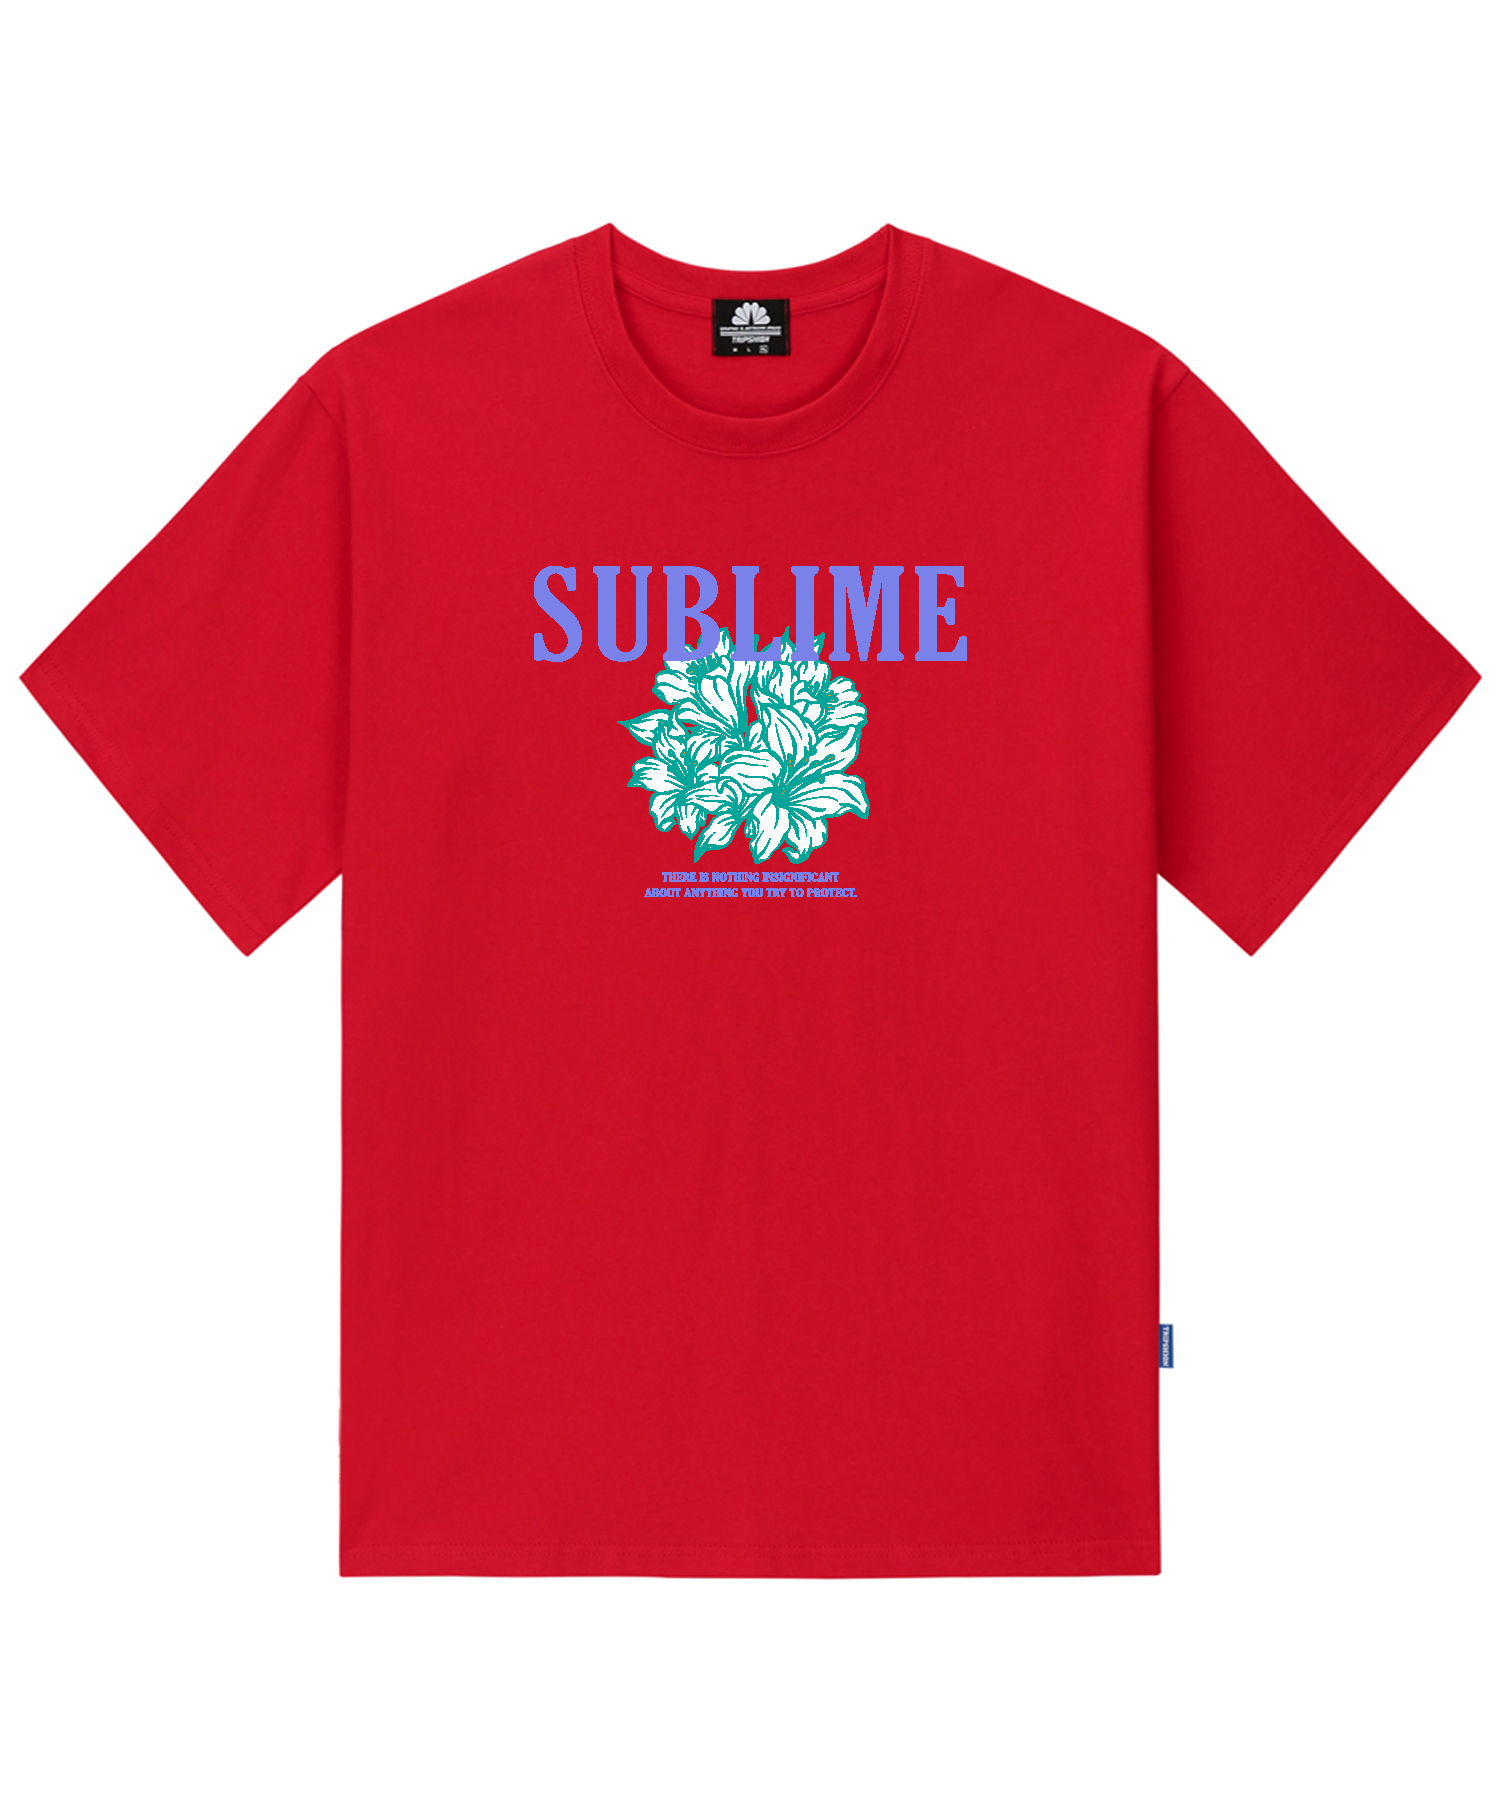 SURLIME FLOWER GRAPHIC T-SHIRTS - RED